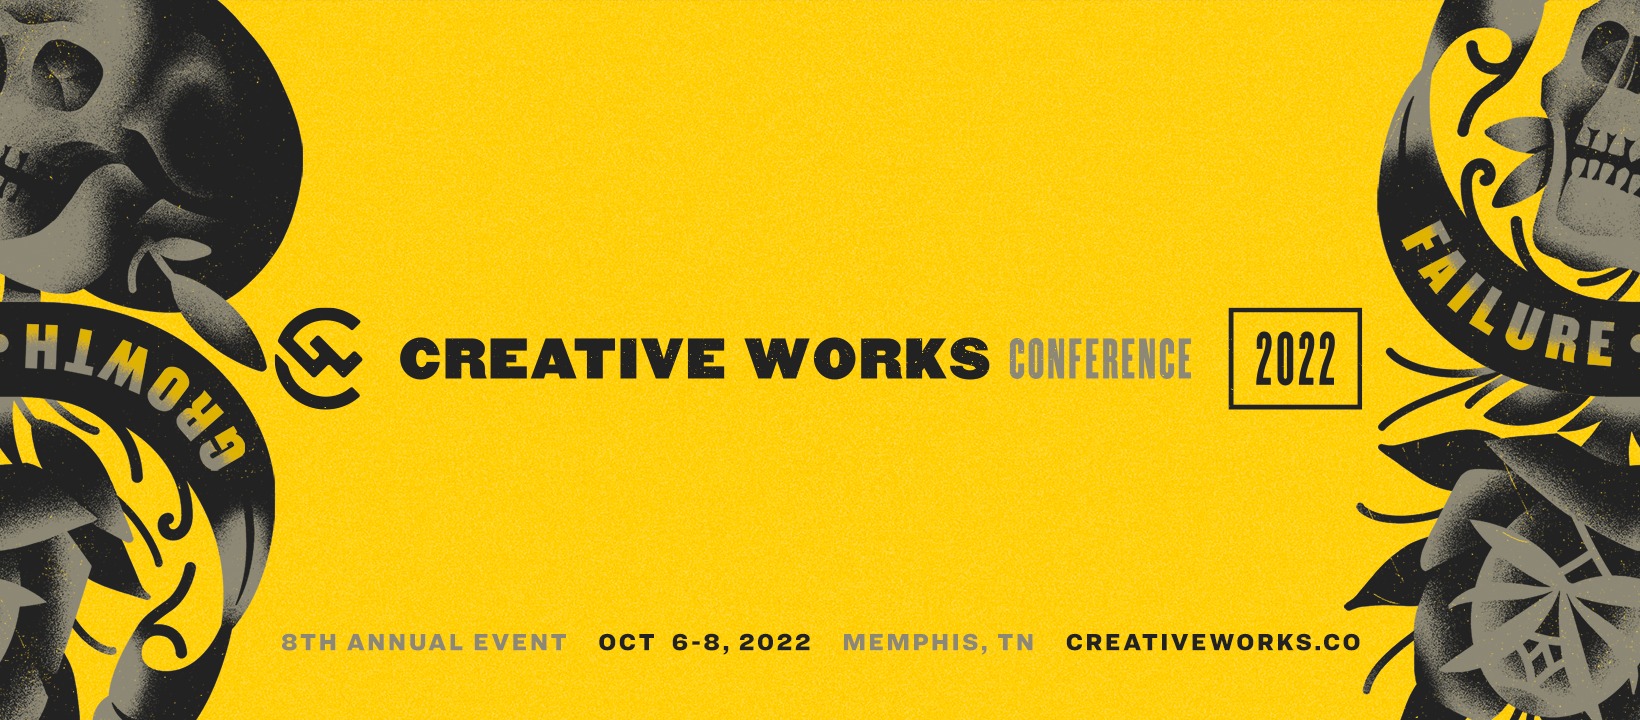 A poster for the Creative Works Conference on a yellow background.